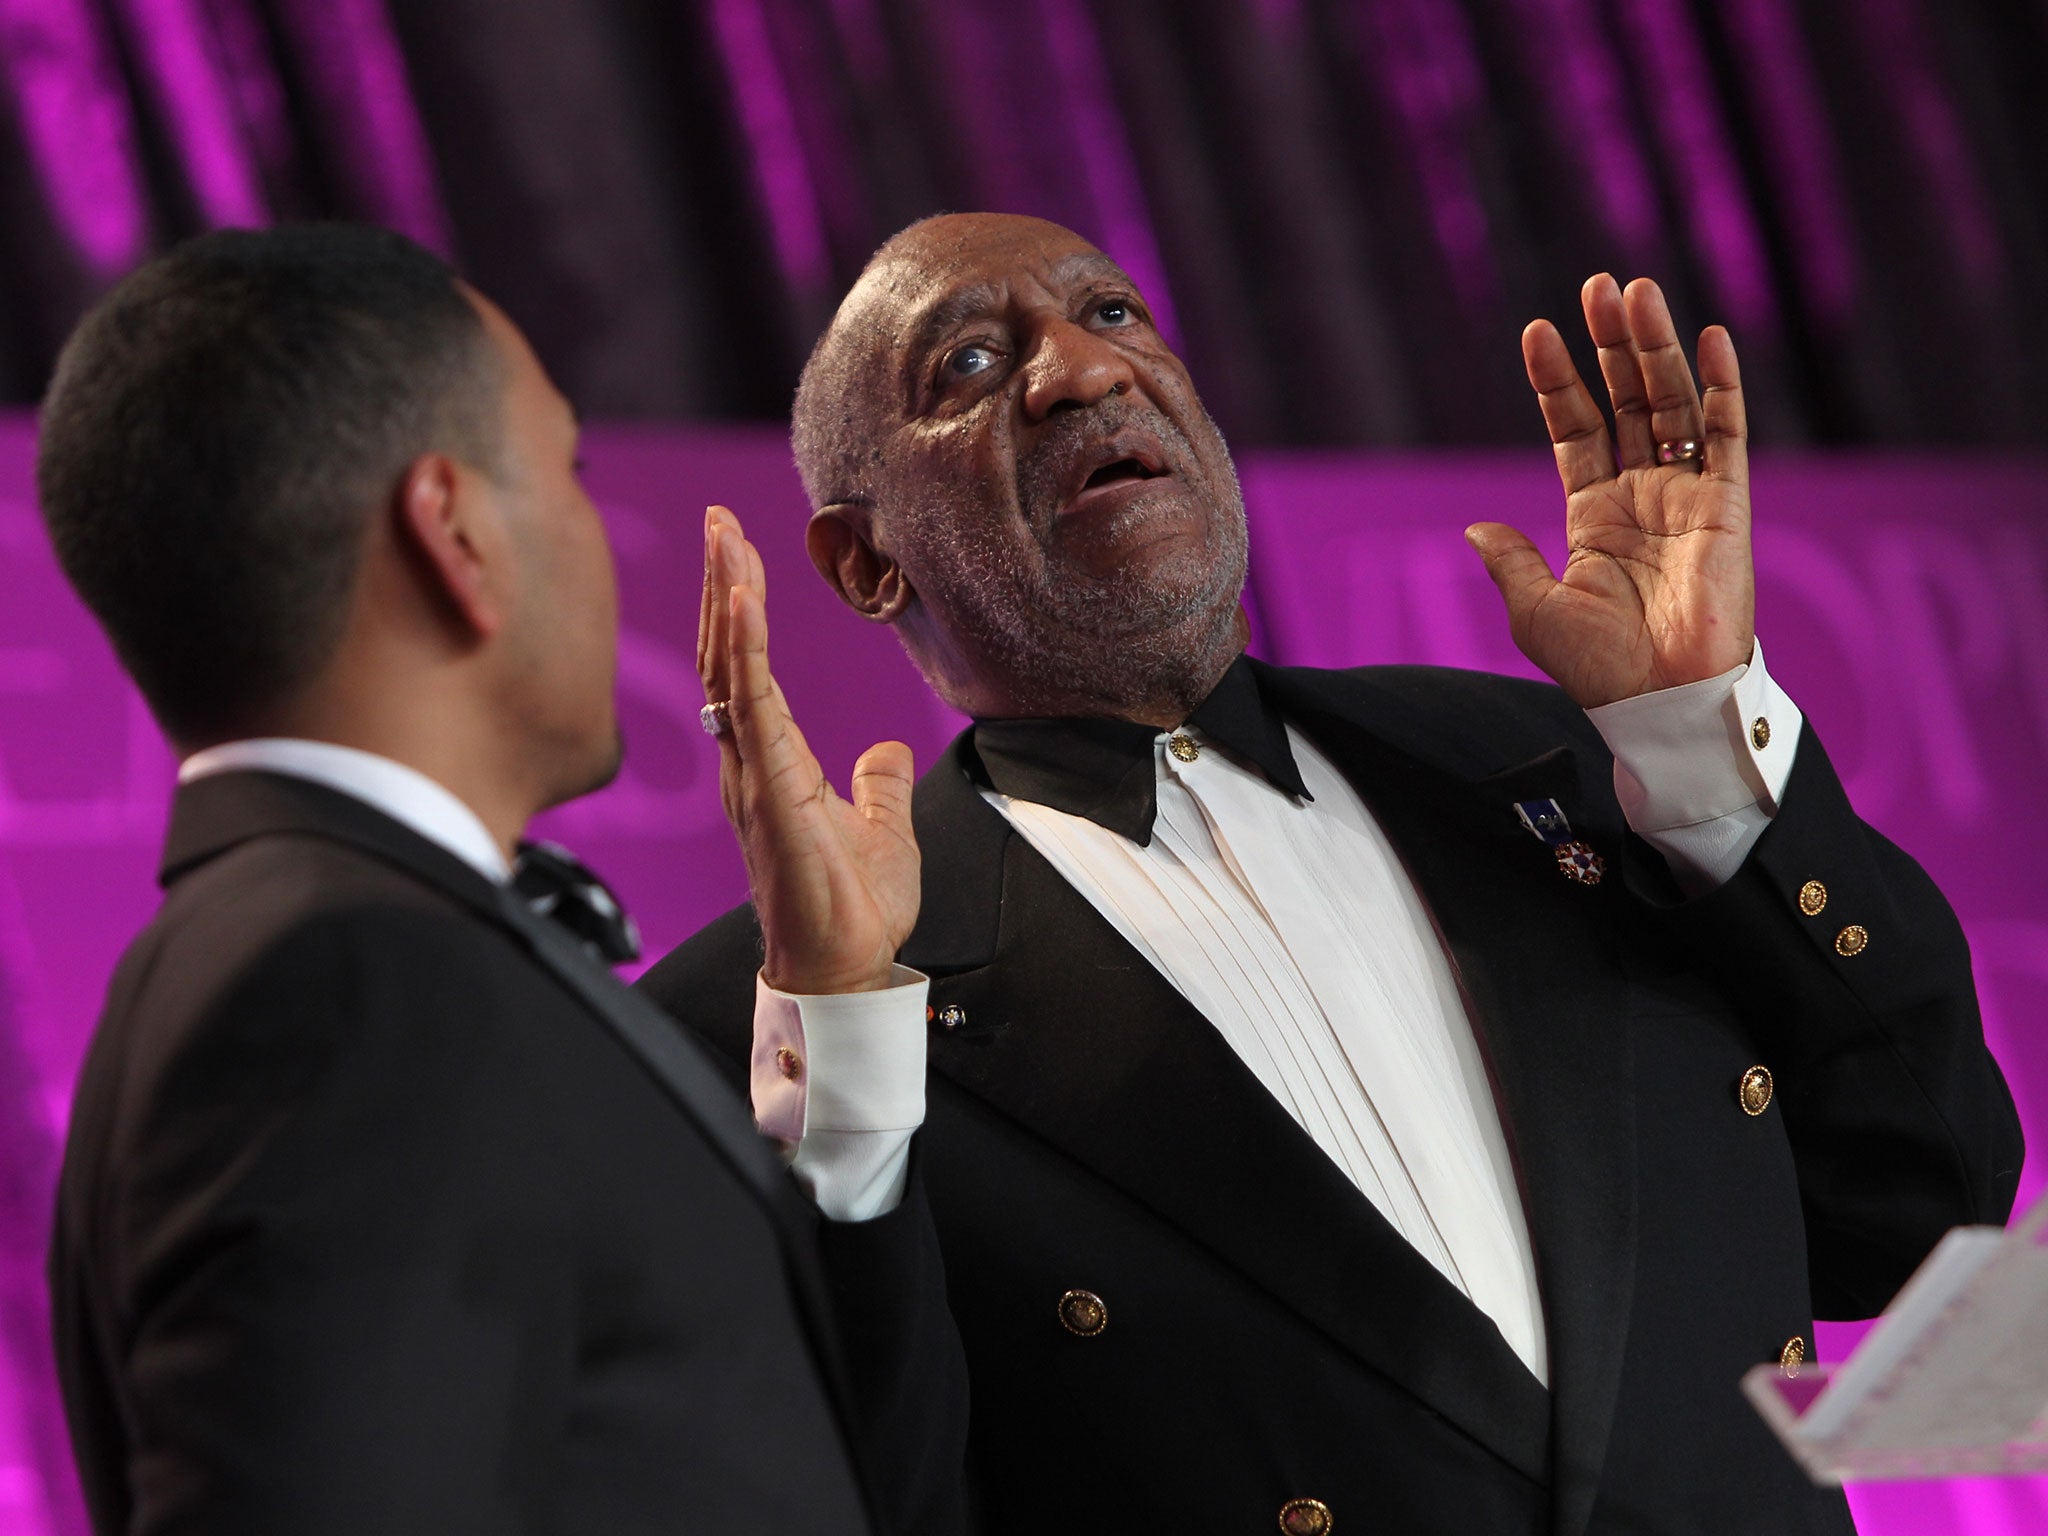 Bill Cosby speaks onstage at the Thurgood Marshall College Fund 25th Awards Gala on 11 November 2013 in Washington